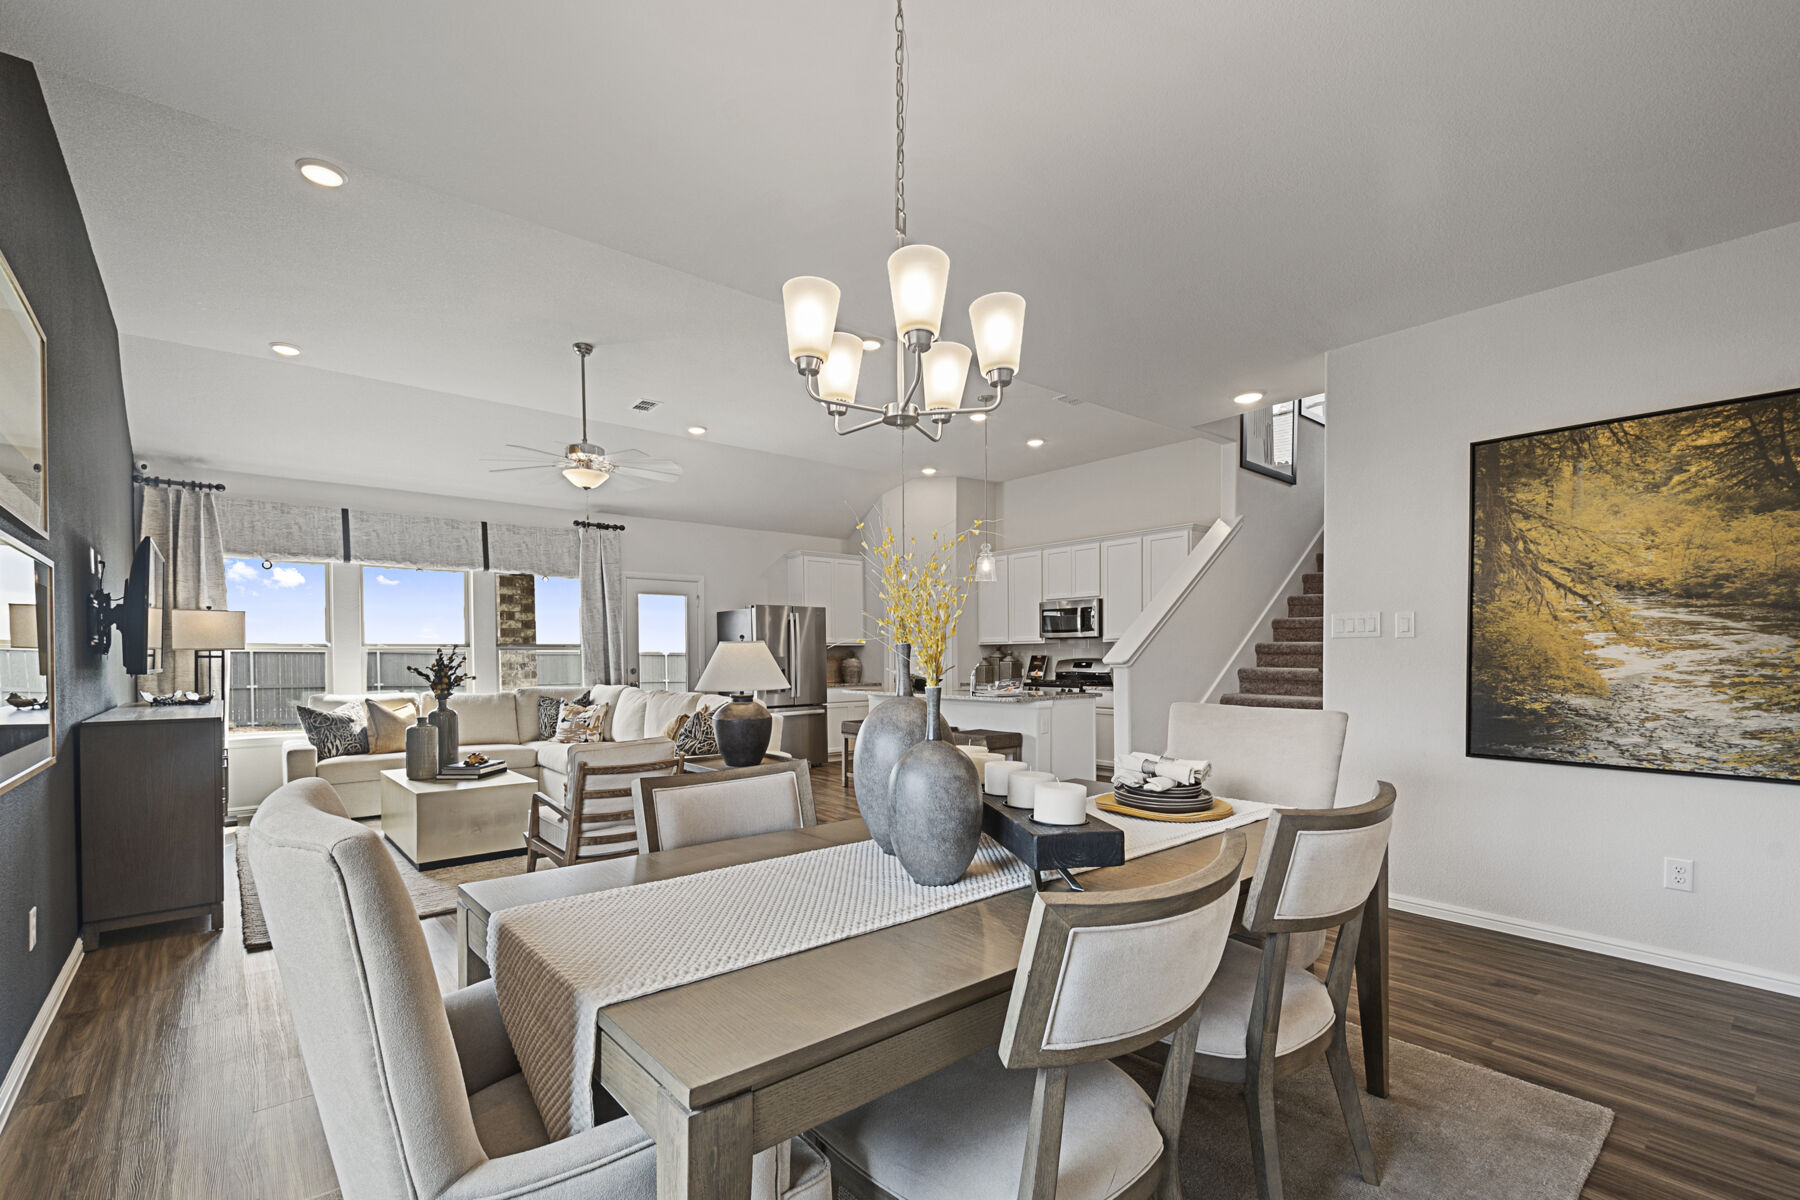 Bright and spacious open-concept living area with combined dining space, modern furnishings, and a view of the staircase in new homes in Goodland TX.